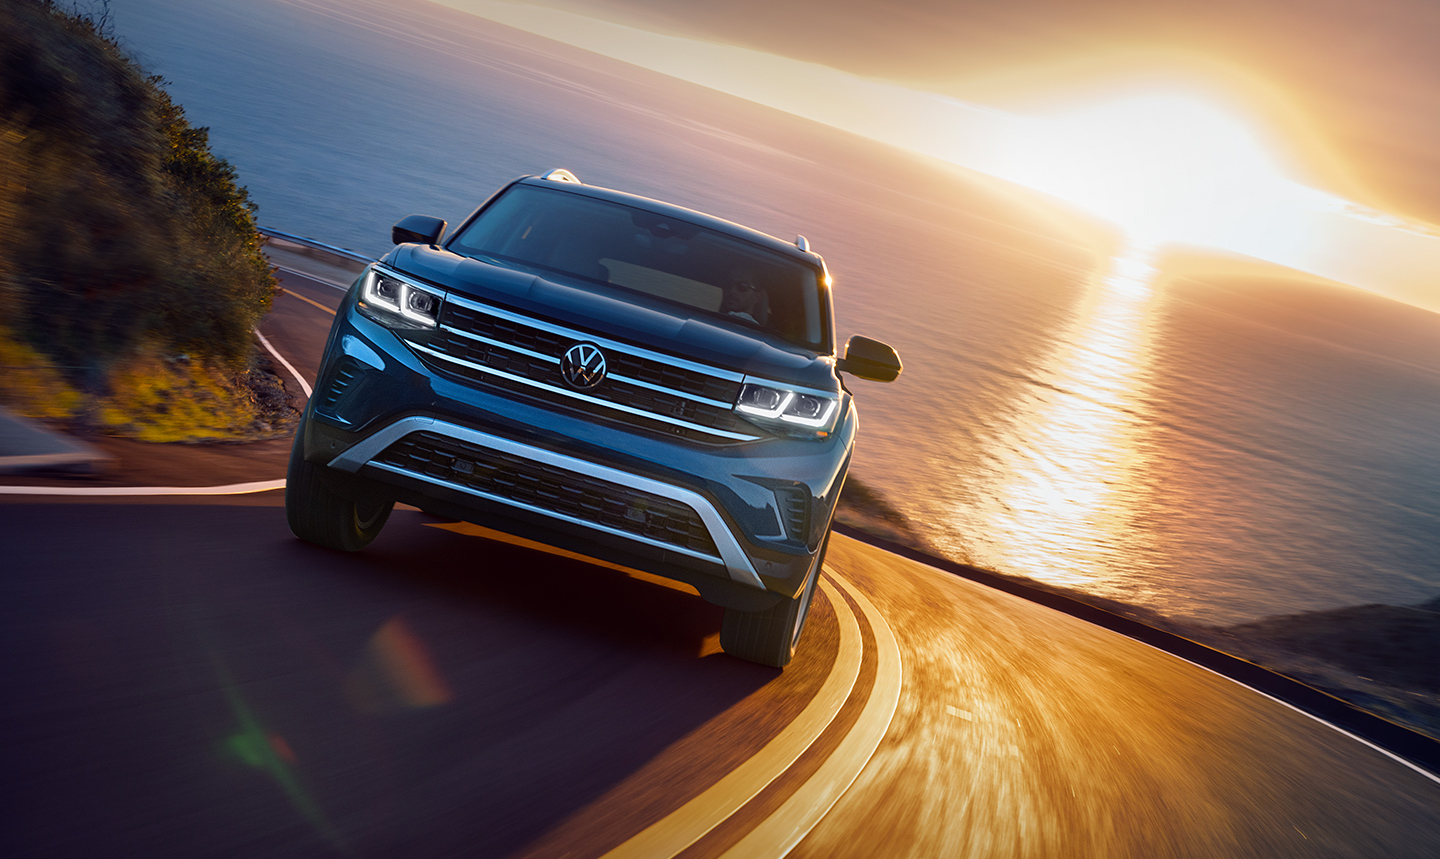 A blue 2022 Volkswagen Atlas drives on a winding road during a sunset in the background, how much does a fully loaded one cost?